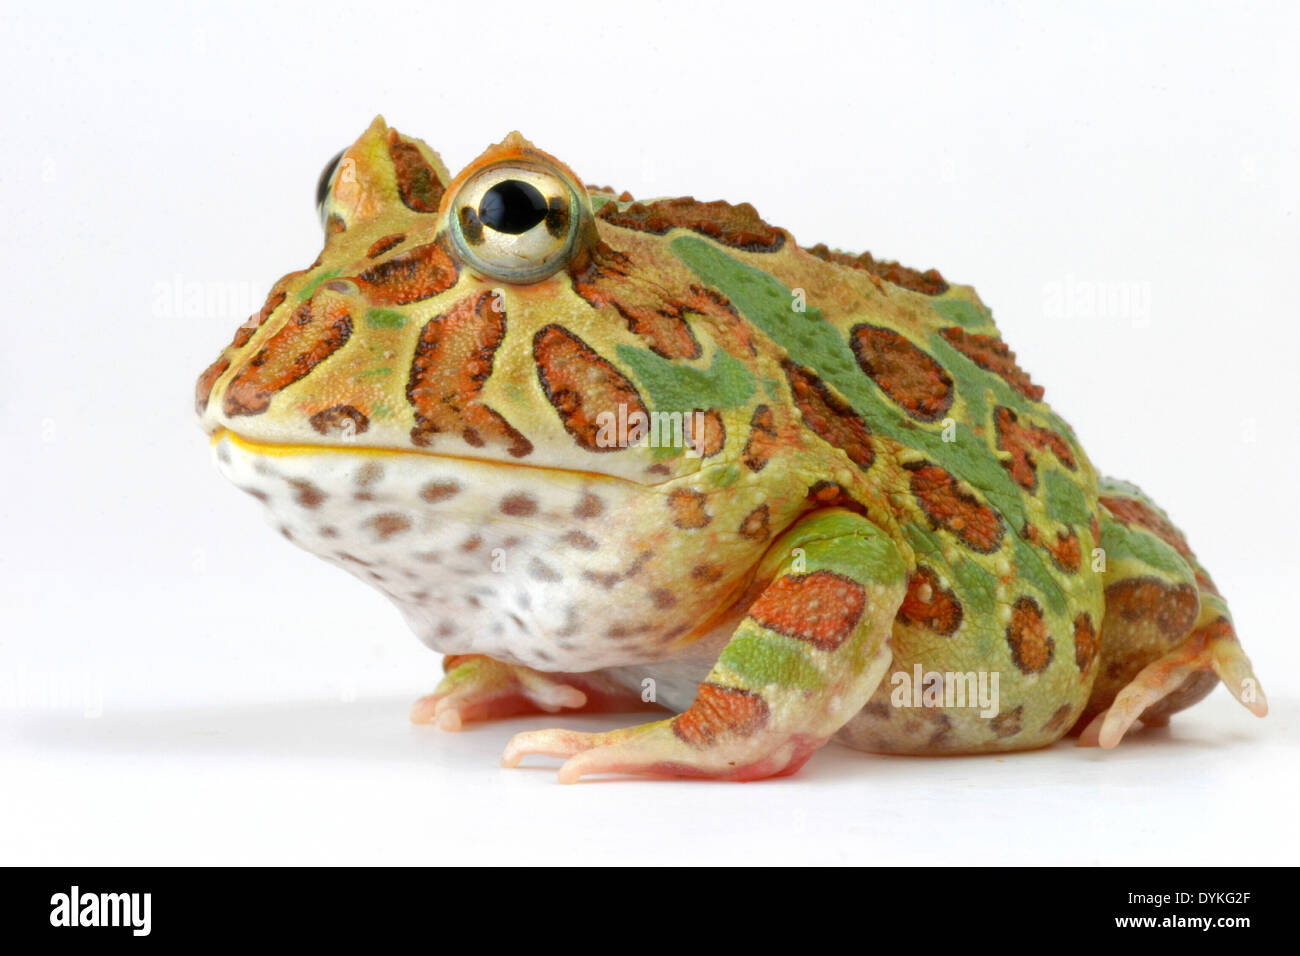 argentine horned frog, pacman frog (Ceratophrys ornata), two individuals sitting side by side Stock Photo